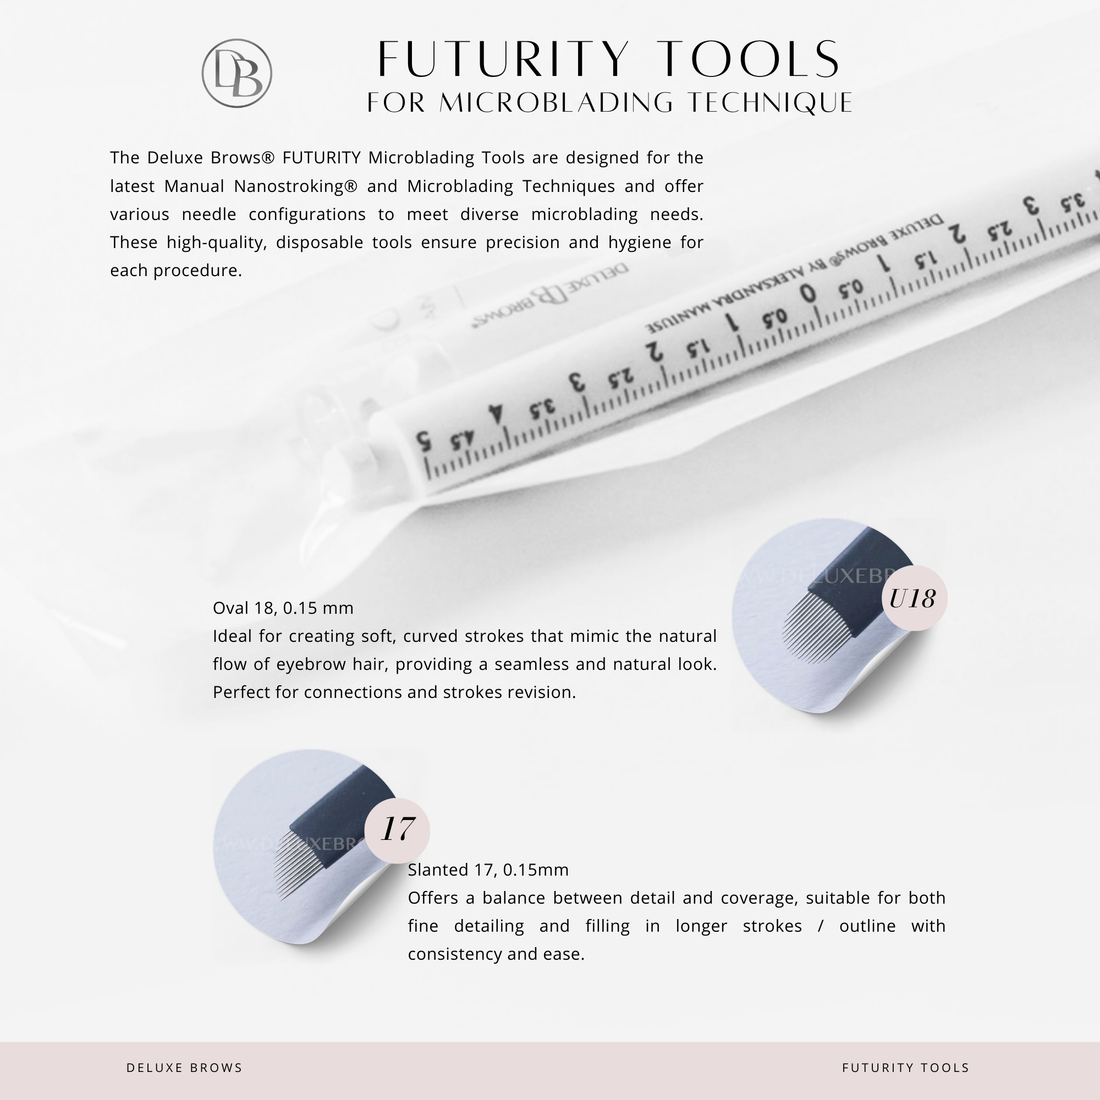 Deluxe Brows® FUTURITY Microblading Tools